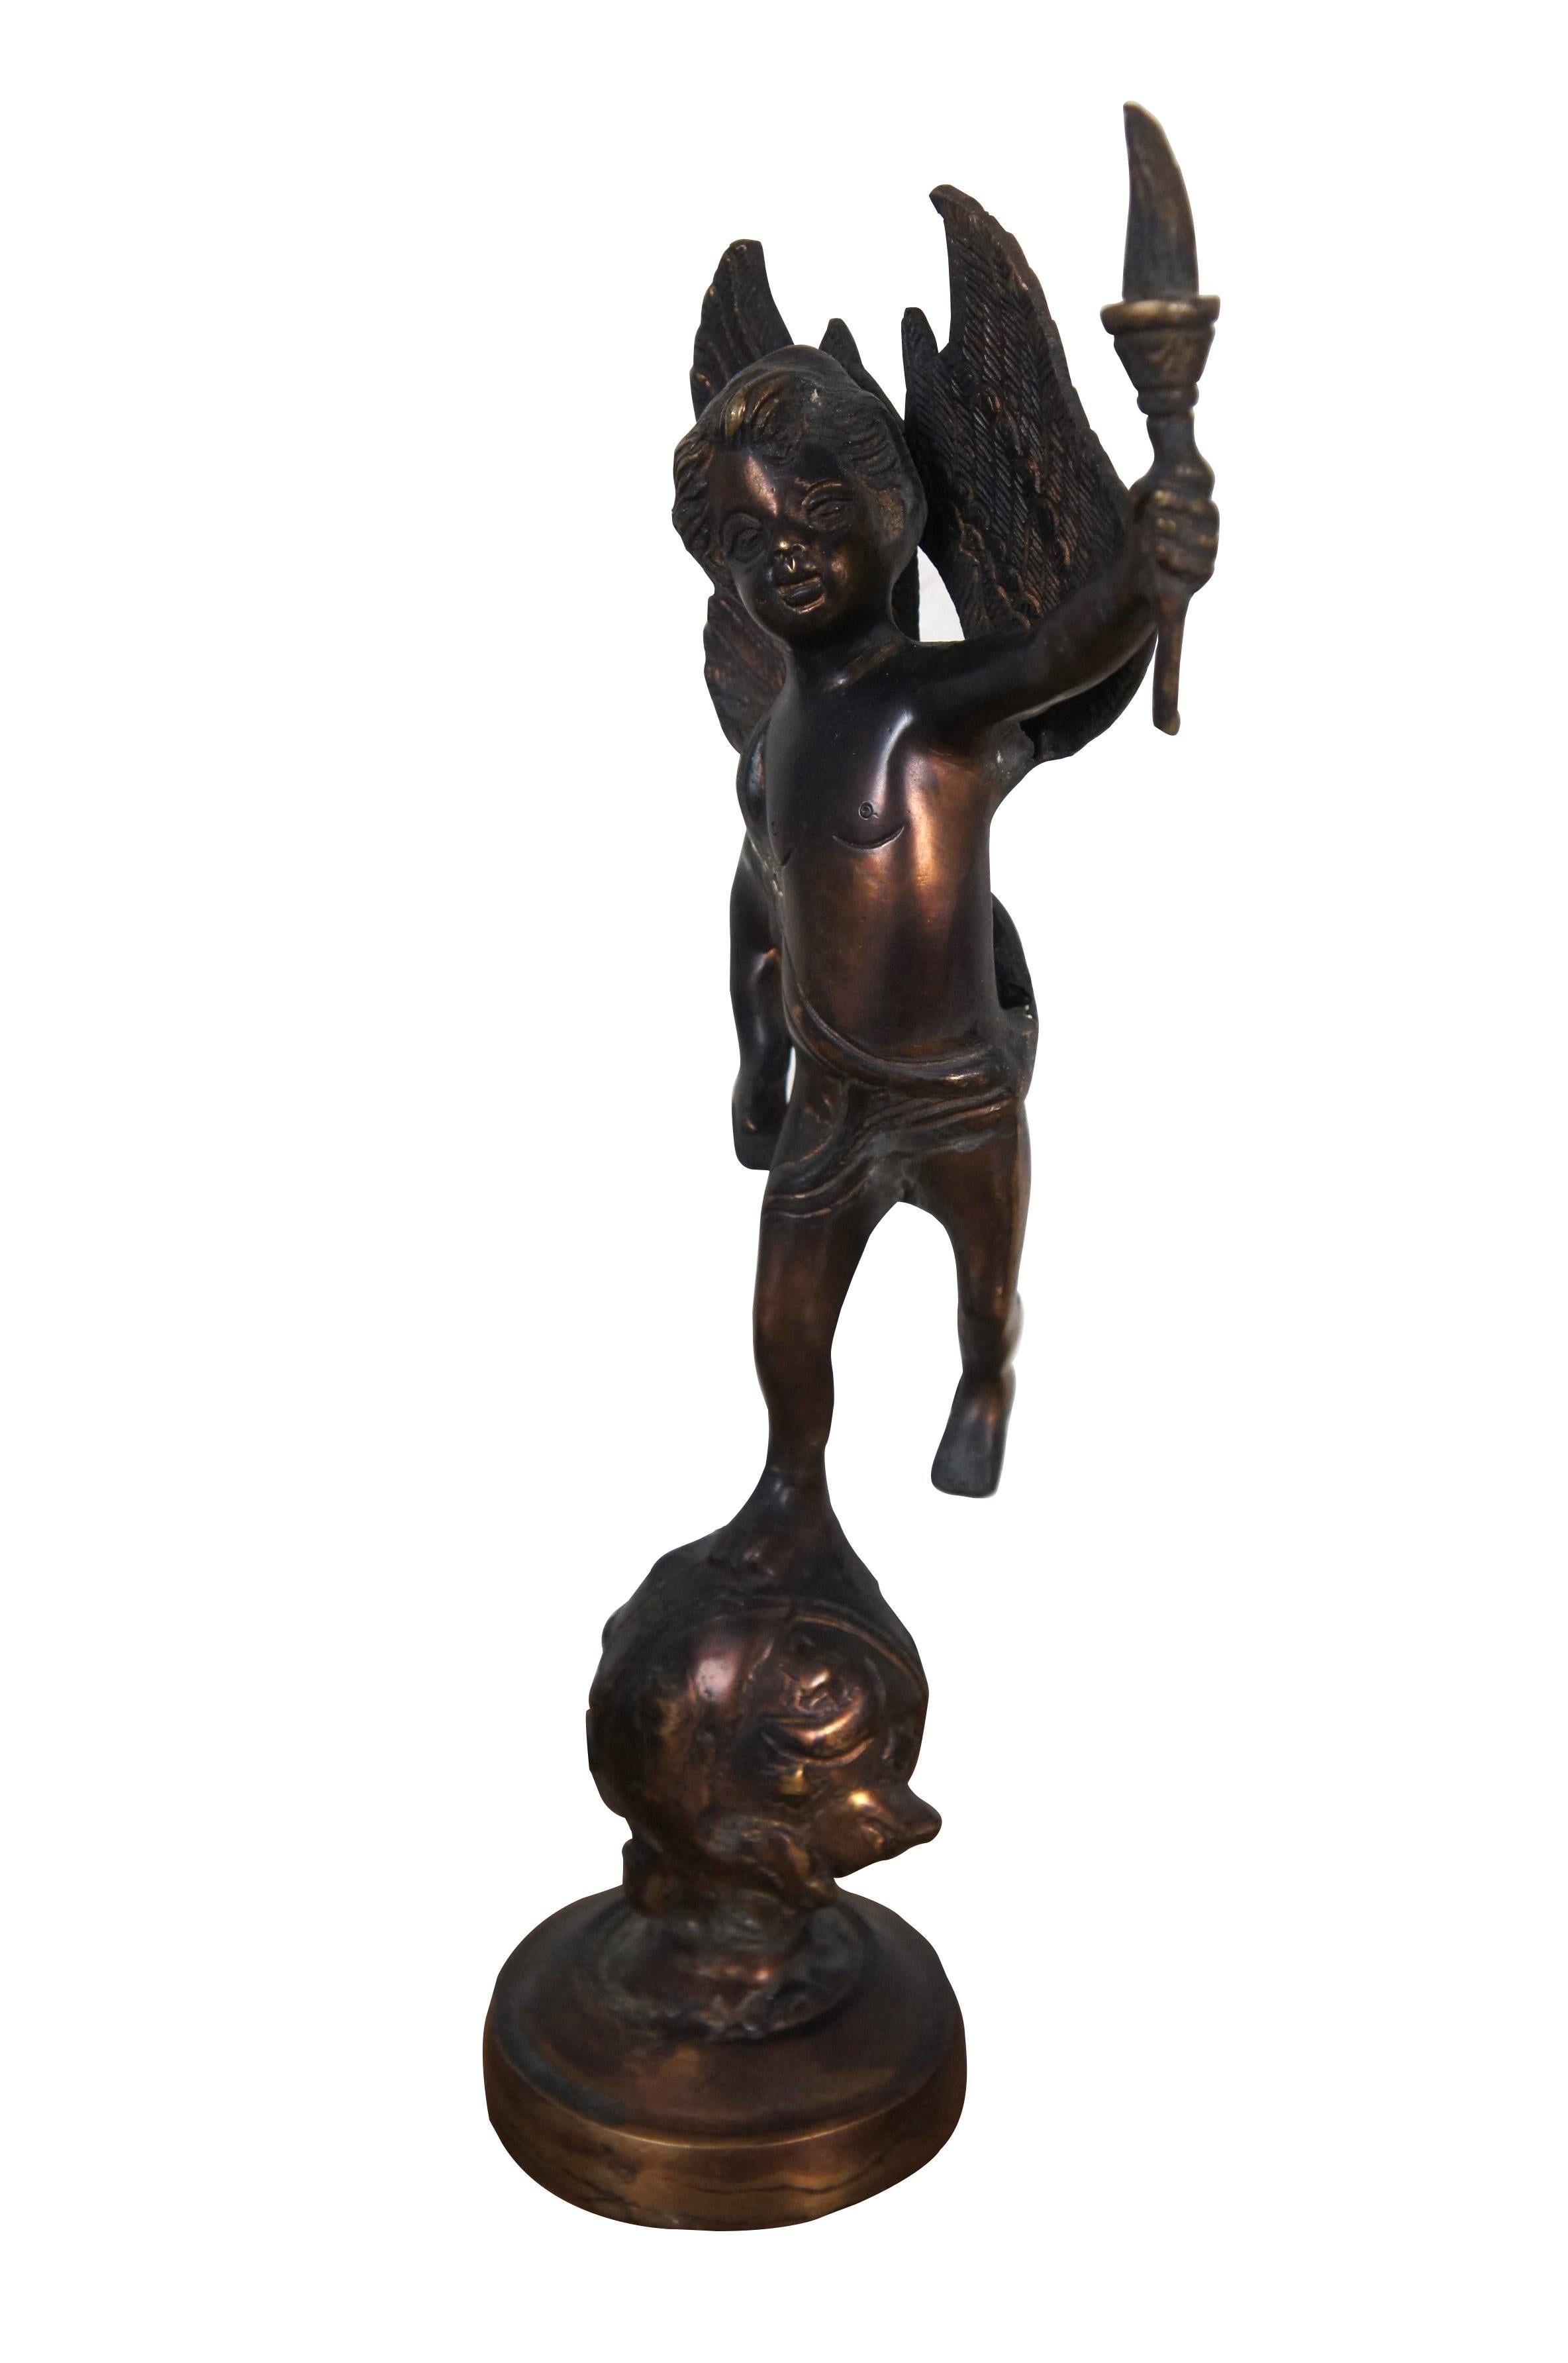 Vintage cast bronze sculpture / figurine in the shape of a putto / cherub / angel carrying a torch, perched on top of a globe studded with stars.

